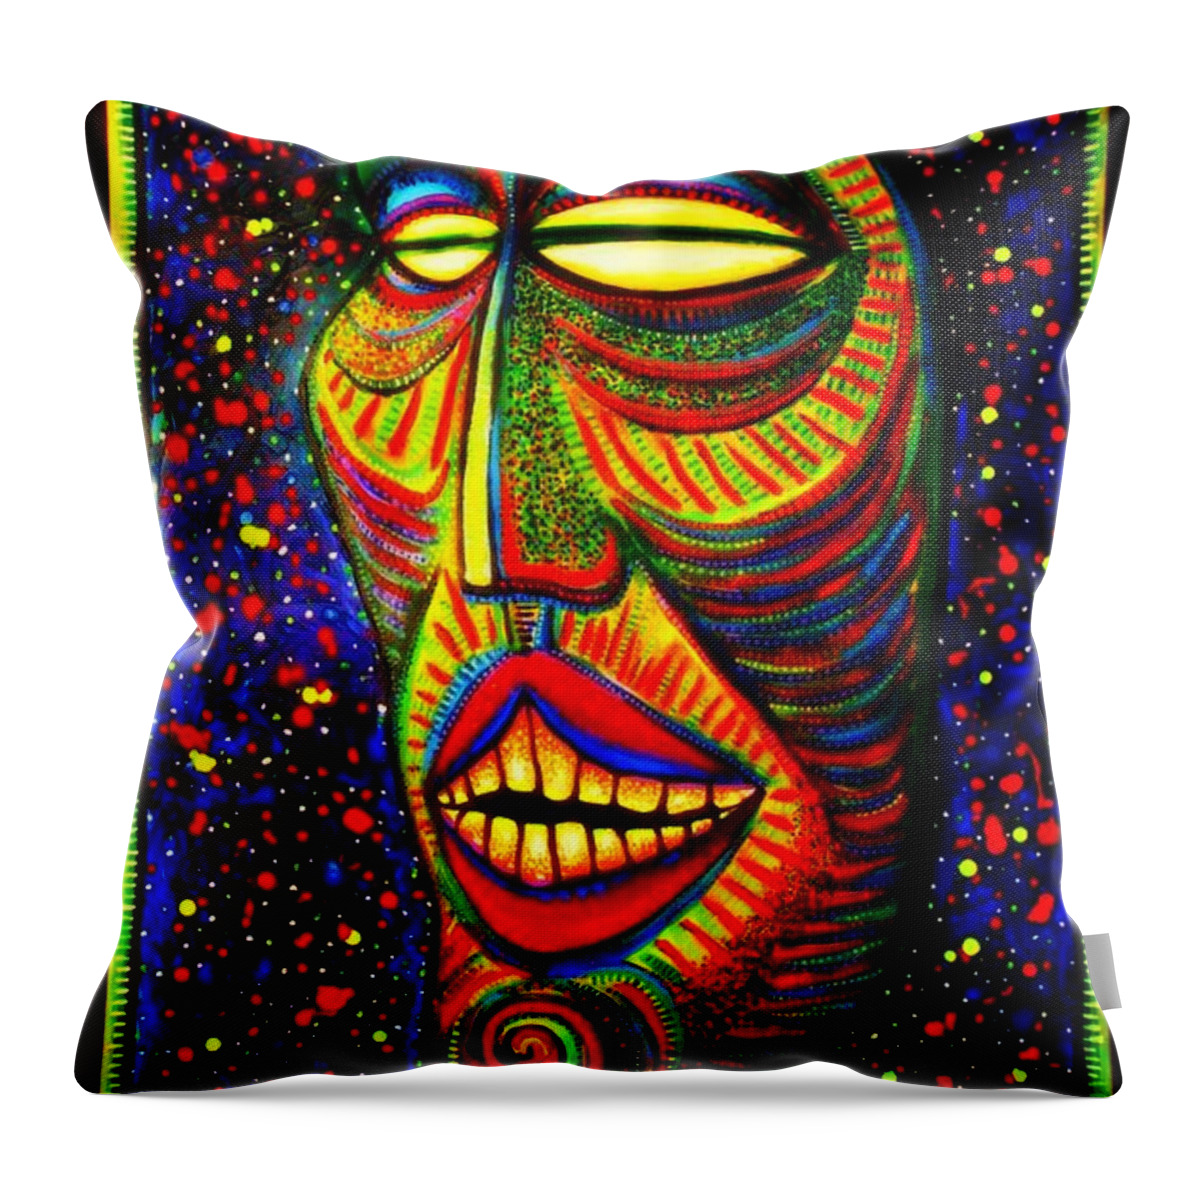  Throw Pillow featuring the photograph Ol' Funny Face by Kelly Awad